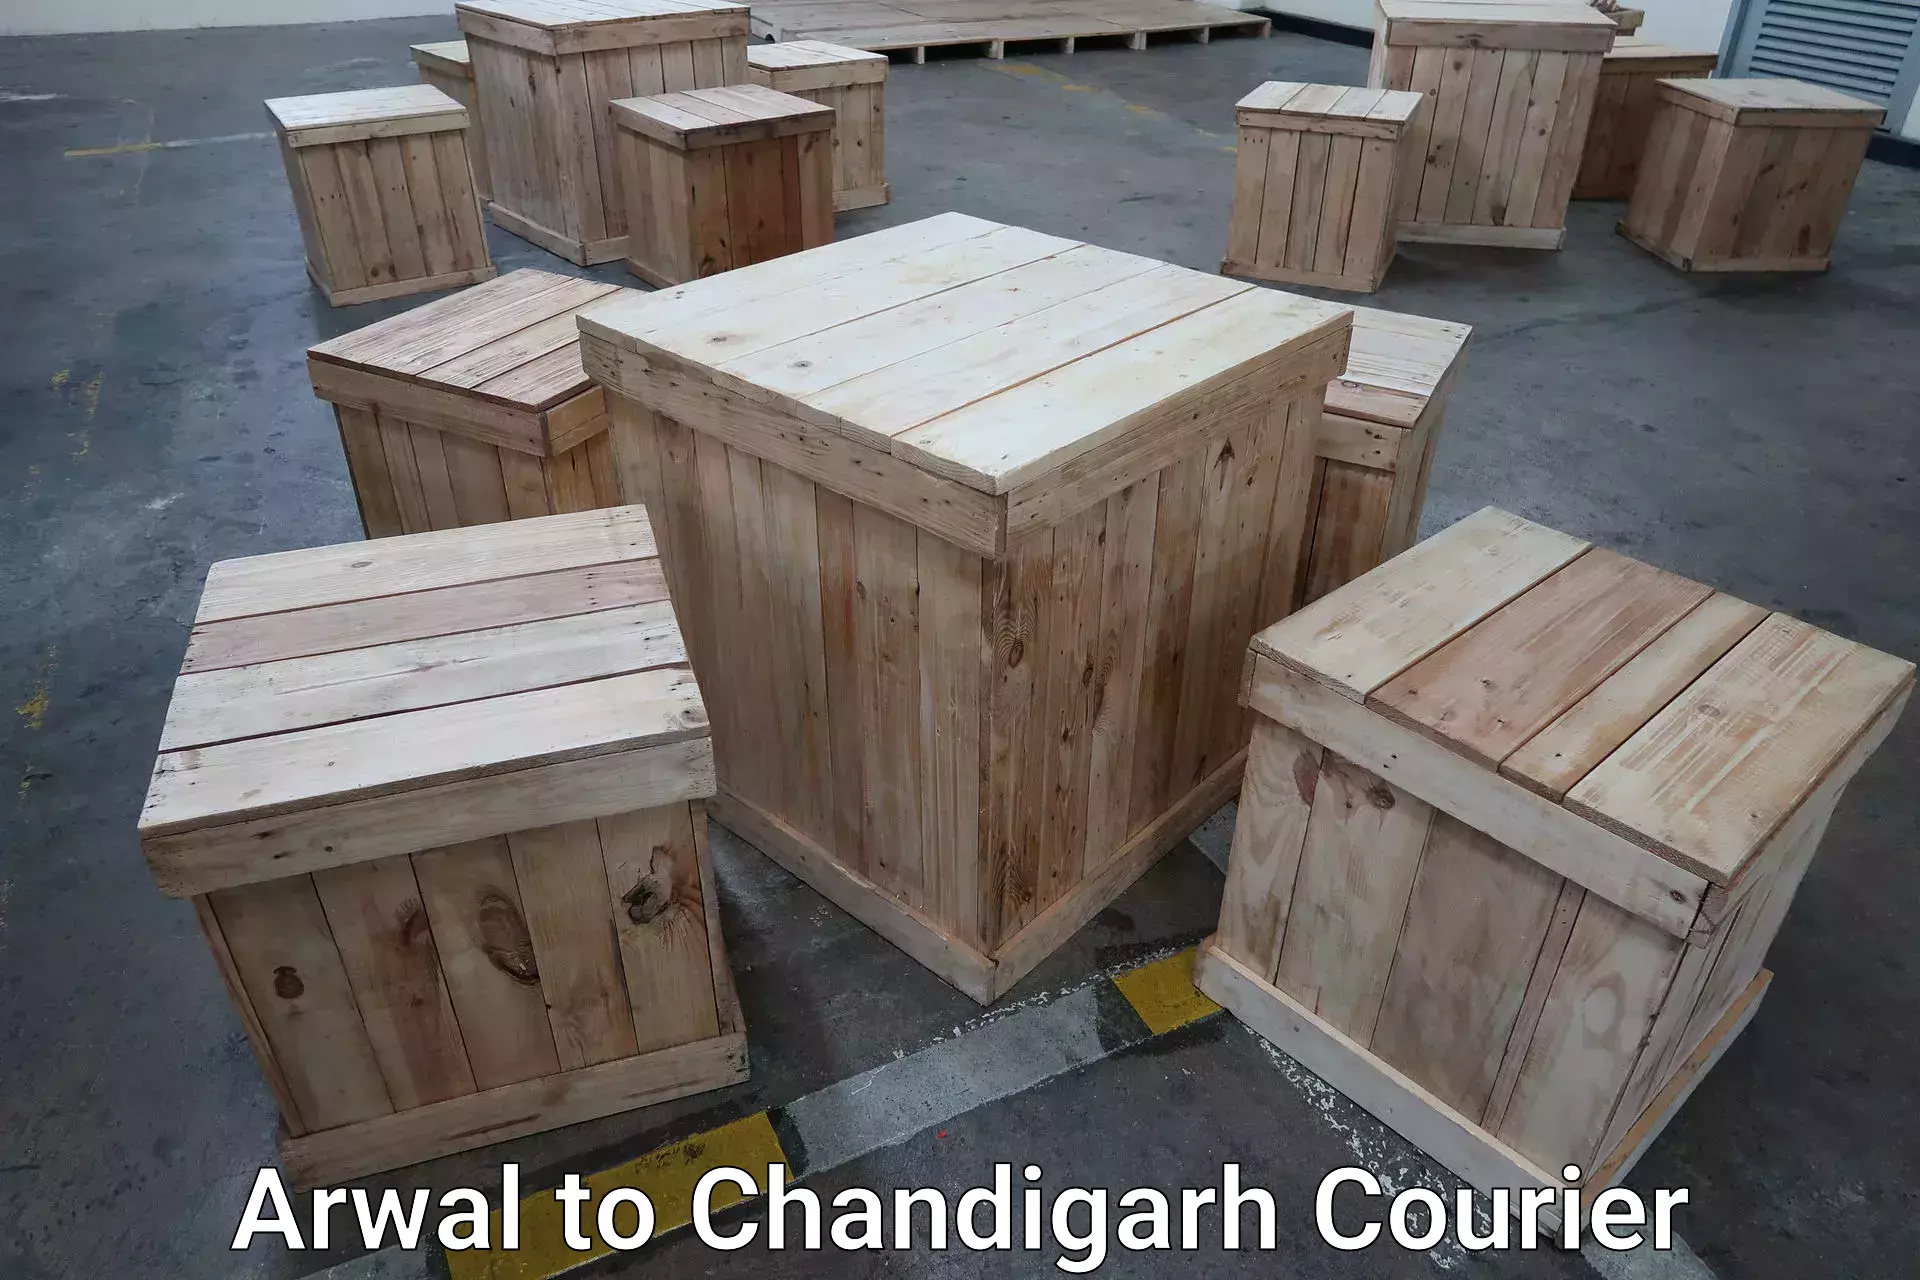 Luggage transport consultancy Arwal to Chandigarh